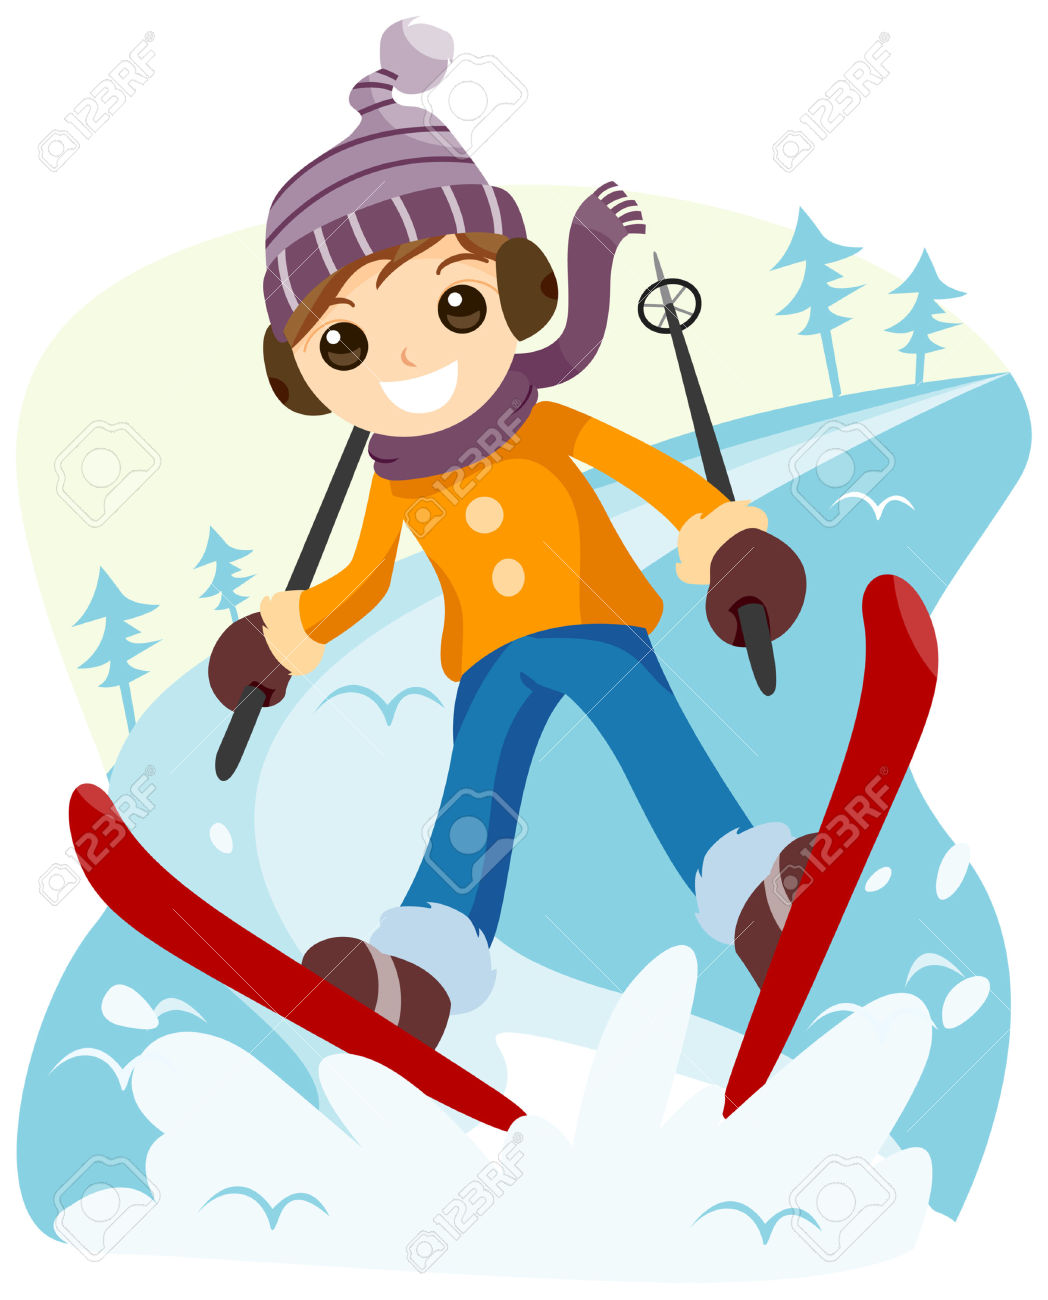 Snow skiing clipart.